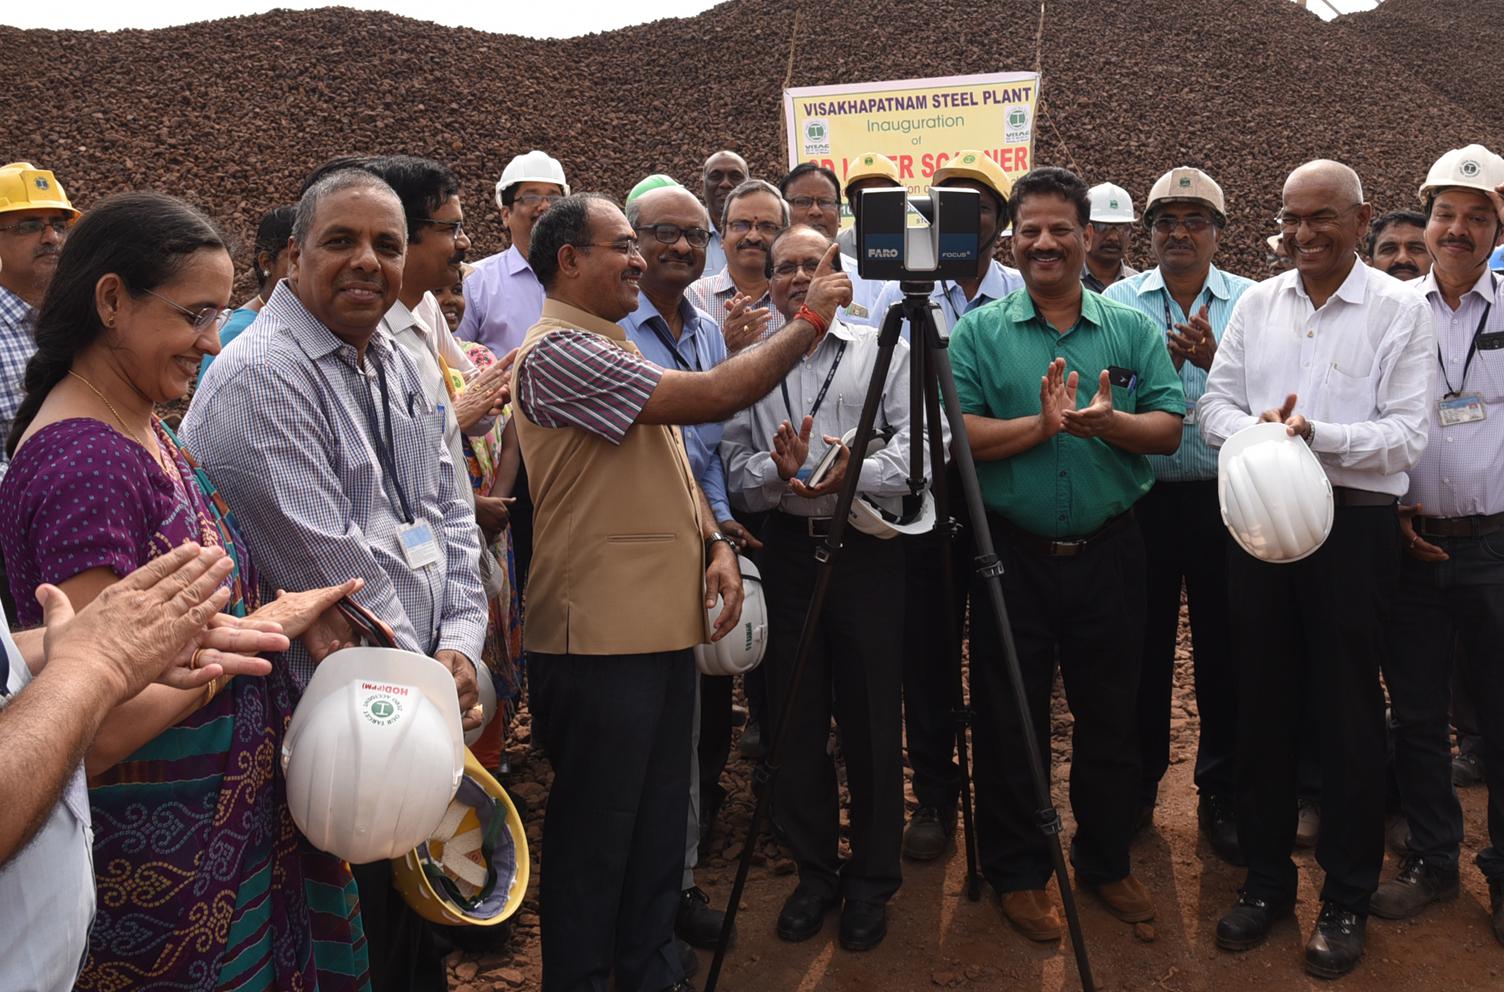 Latest 3D Laser Scanner inaugurated in Vizag Steel